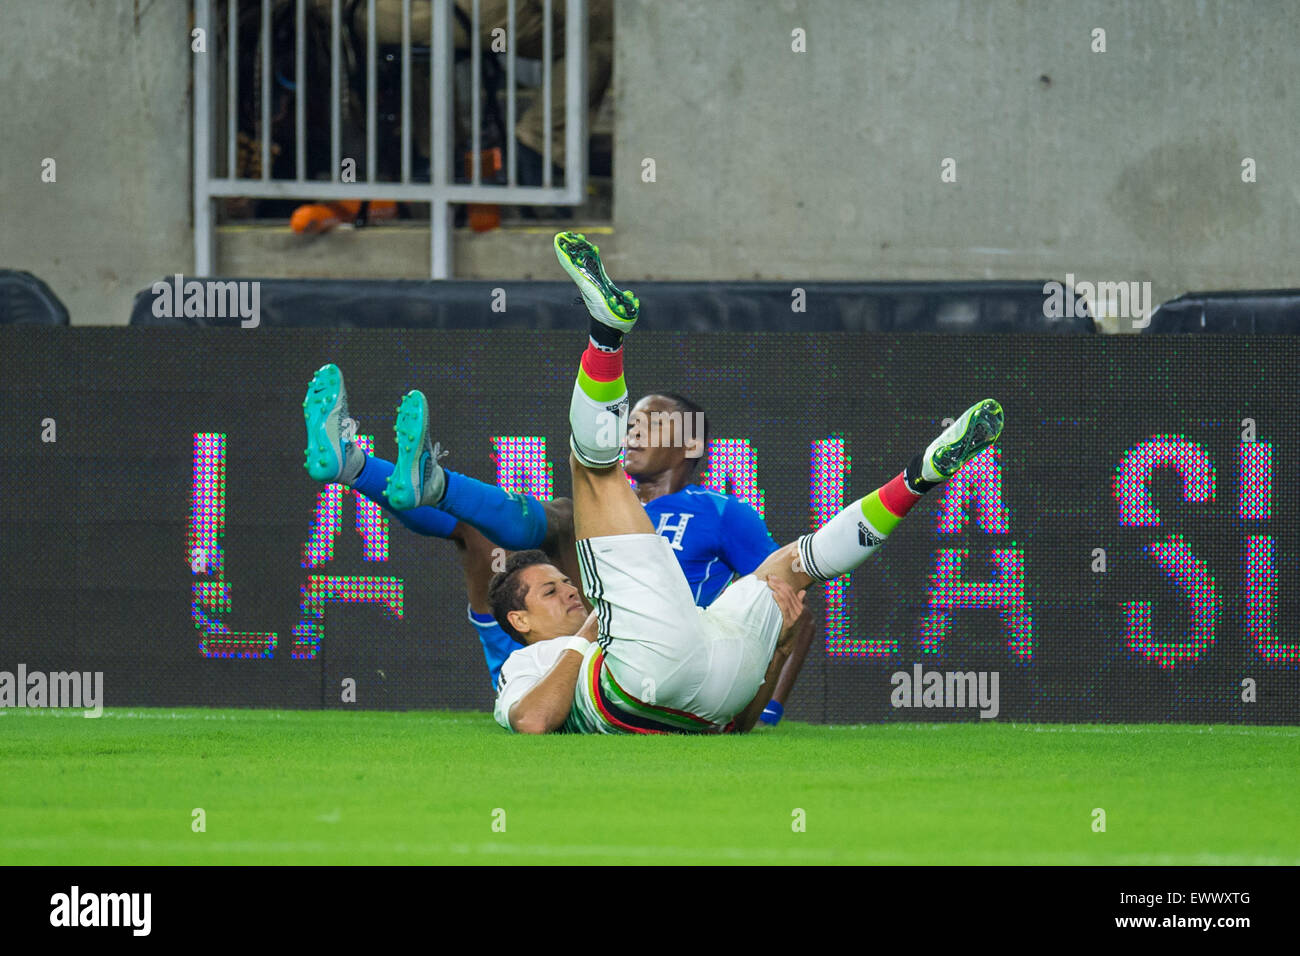 Houston, TX, USA. 1st July, 2015. Mexico forward Javier Hernandez (14) injures his shoulder in a collision with Honduras defender Brayan Beckeles (21) during the 1st half of an international soccer match between Honduras and Mexico at NRG Stadium in Houston, TX. Trask Smith/CSM/Alamy Live News Stock Photo